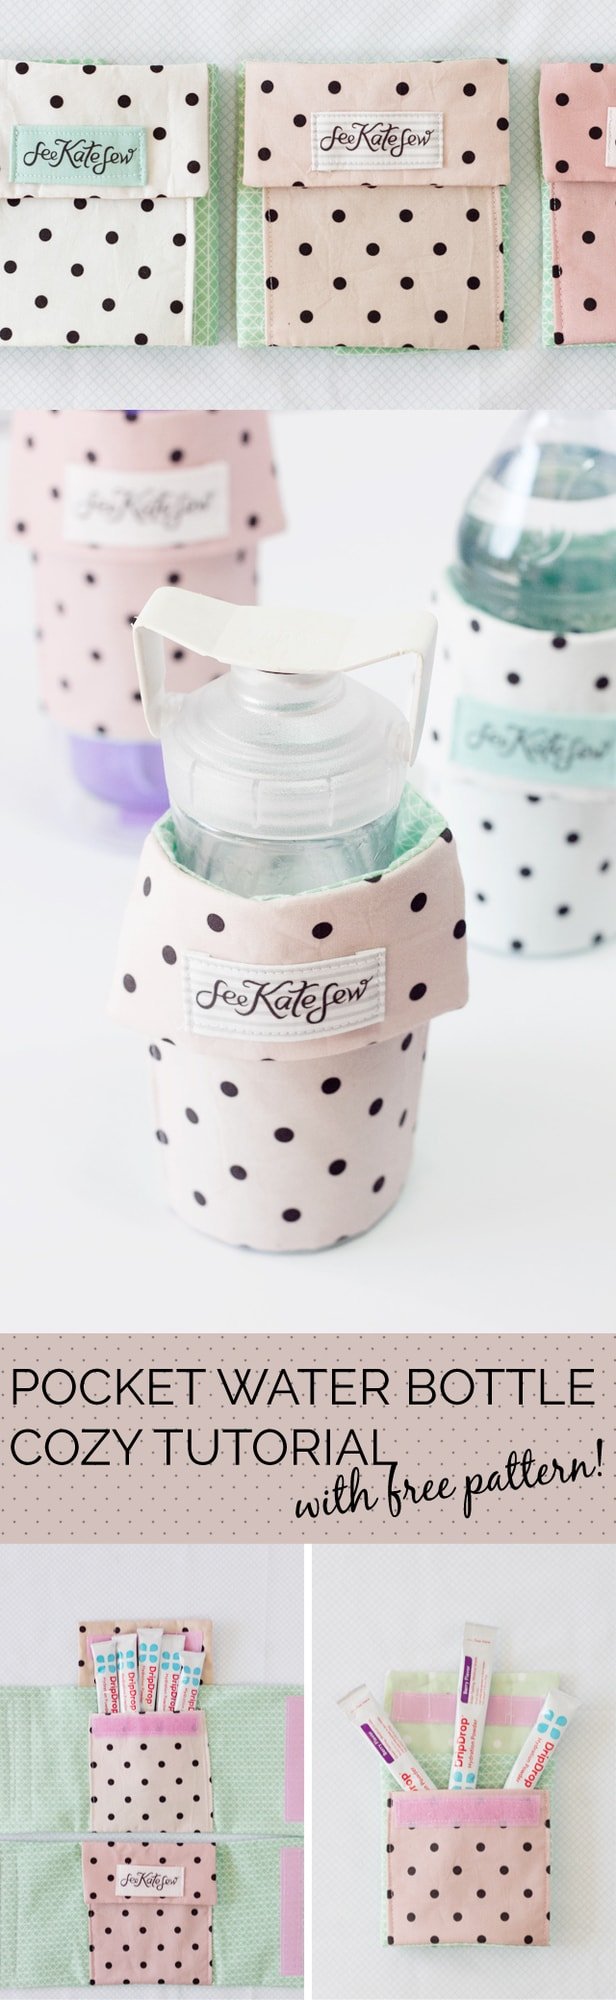 Pocket Water Bottle Cozy | diy water bottle holder | how to sew a cozy | free sewing tutorials | sewing tips and tricks || See Kate Sew #sewingtips #sewingtutorials #diybottleholder